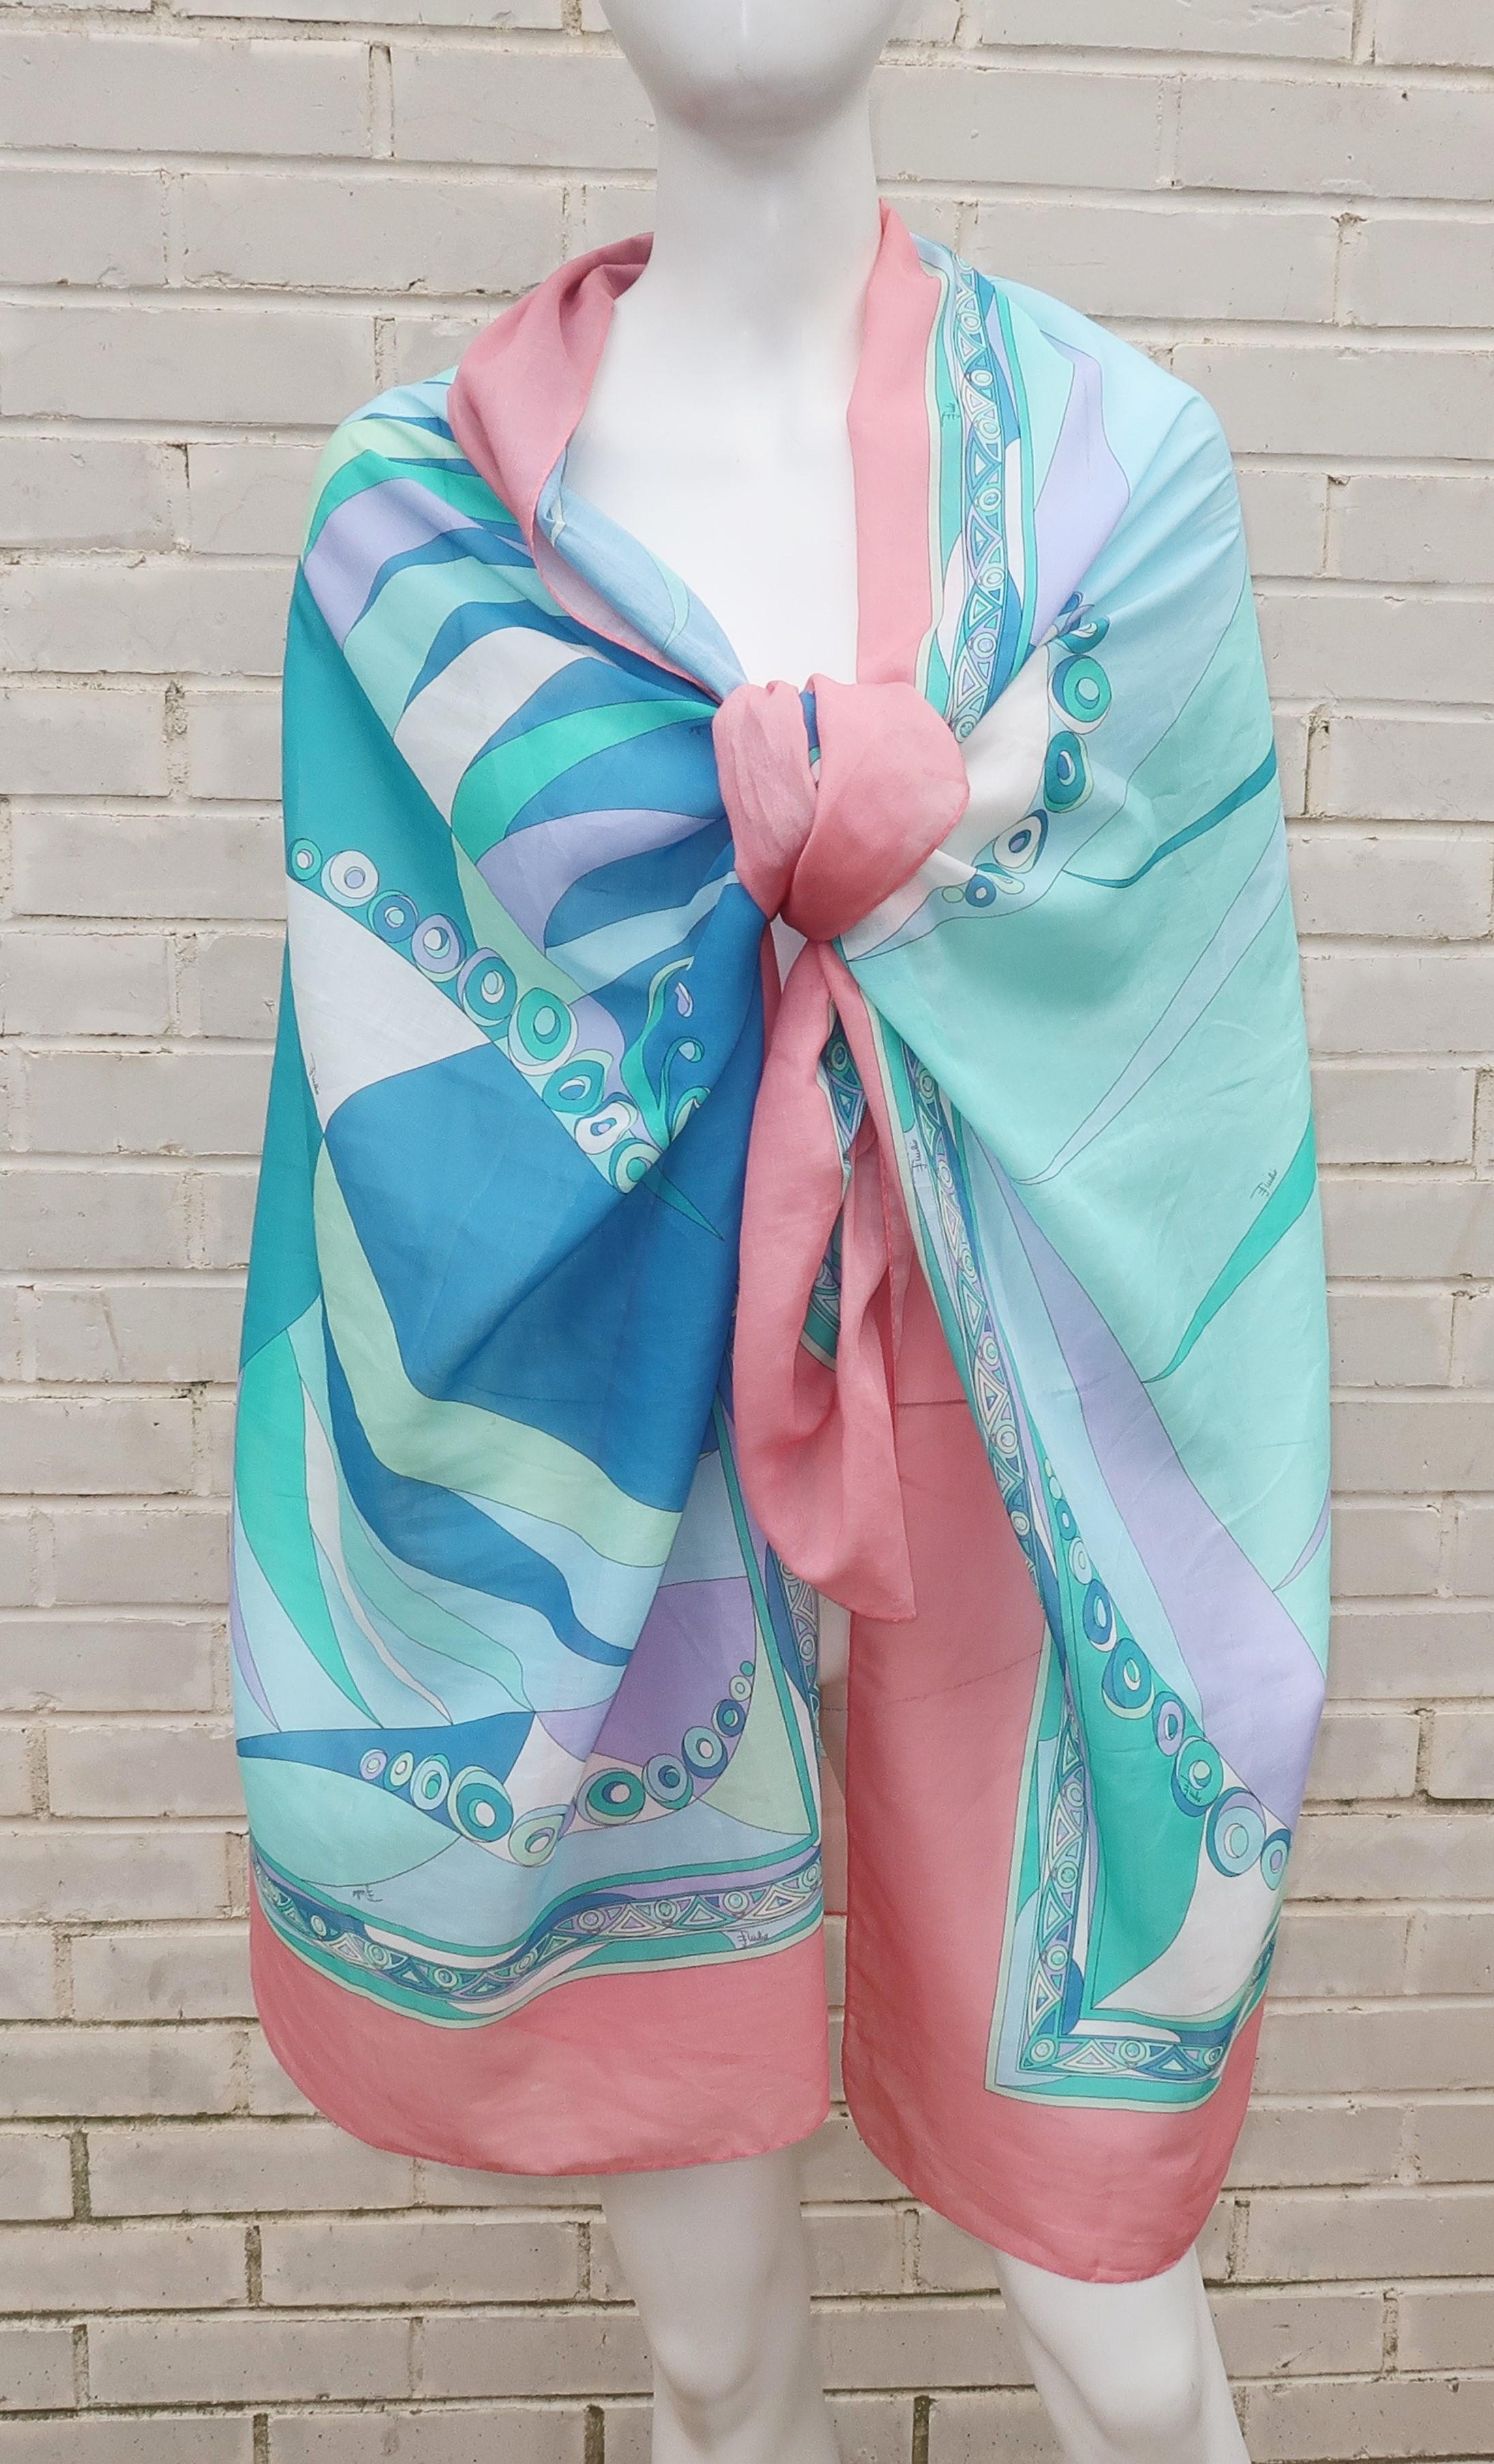 Perfect for warmer weather and sultry days at the beach! This fine muslin cotton Emilio Pucci scarf is both long and lightweight enough to wrap and drape to your heart's content. It is a classic mod psychedelic print in shades of salmon pink, aqua,